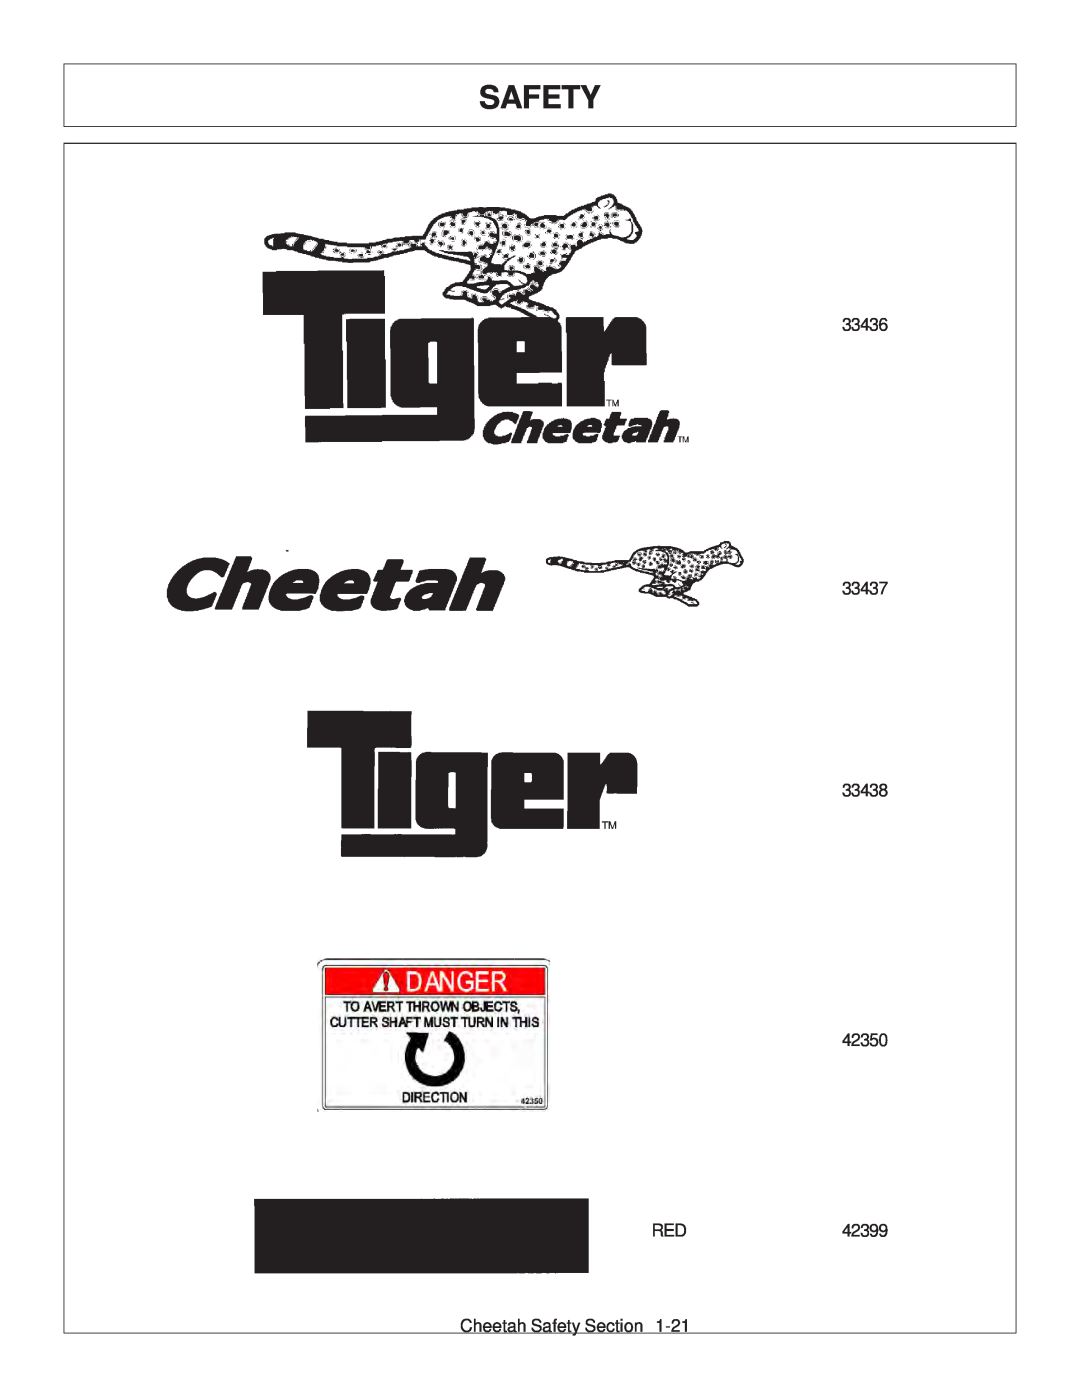 Tiger Products Co., Ltd JD 5101E, JD 5083E, JD 5093E manual 33436 33437 33438 42350 RED42399, Cheetah Safety Section 